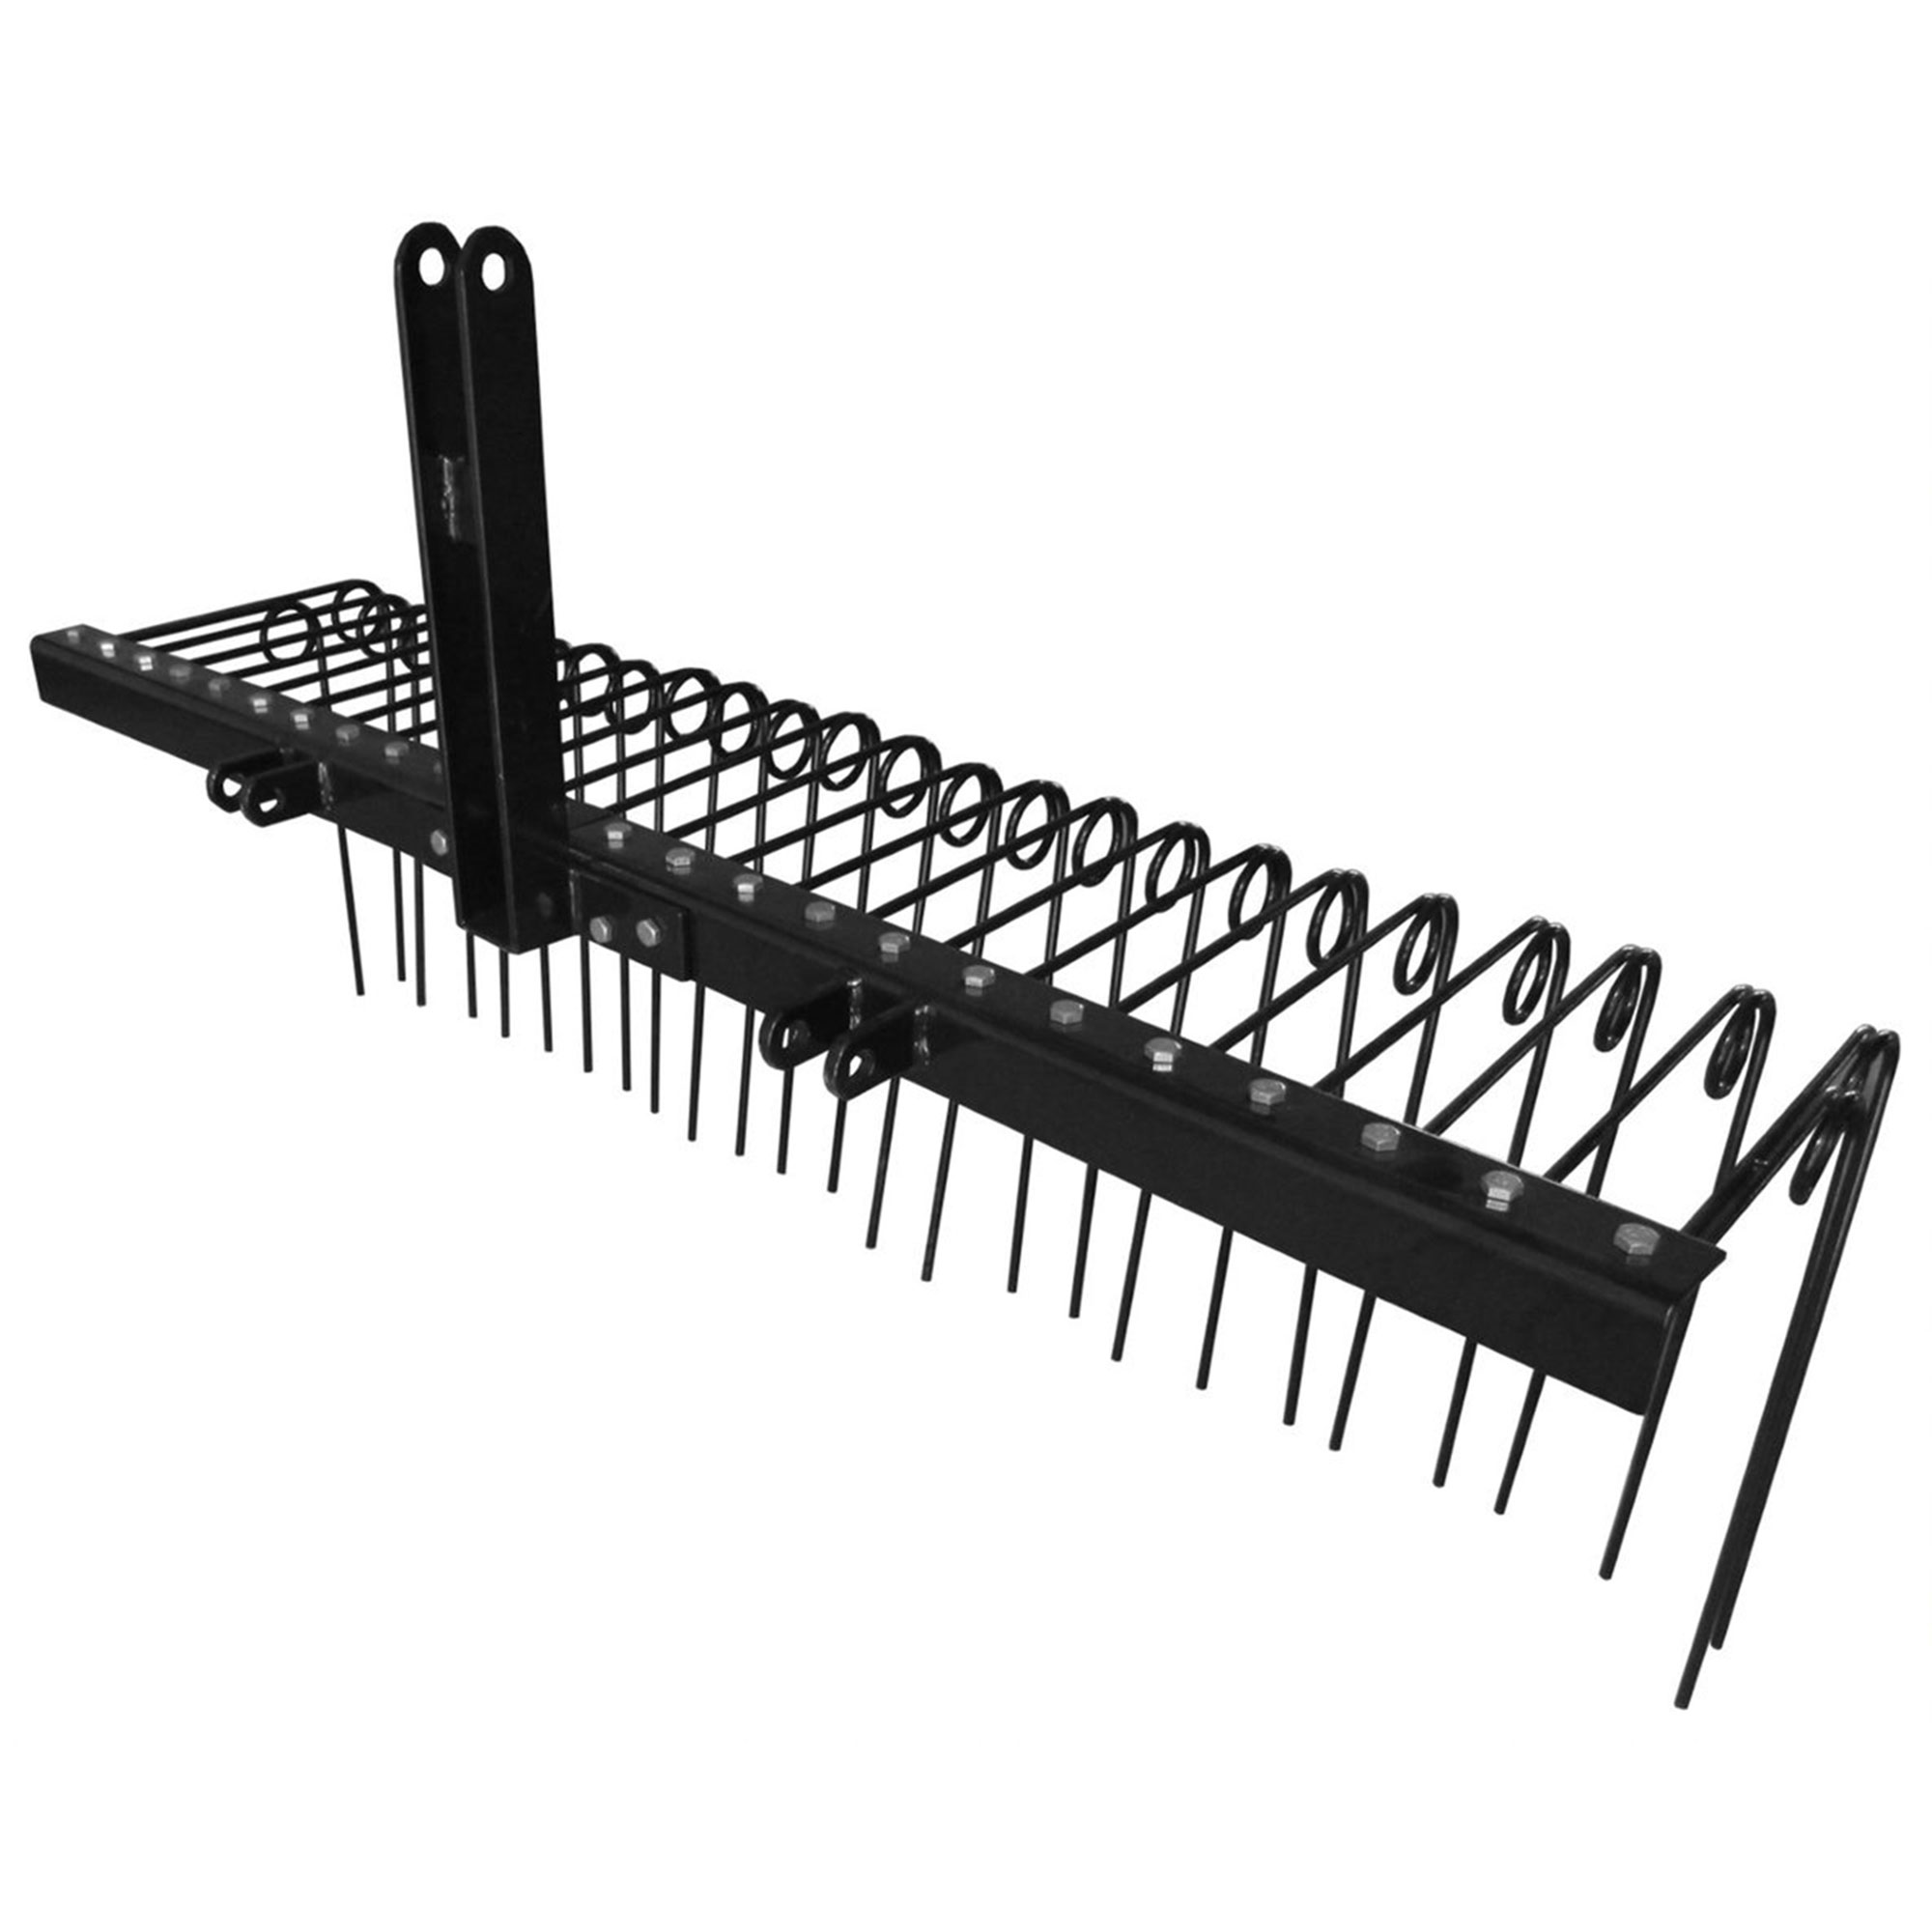 Field Tuff 60in Pine Straw Rake w/ Coil Spring Tines & 3 Point Hitch, Steel - image 1 of 9